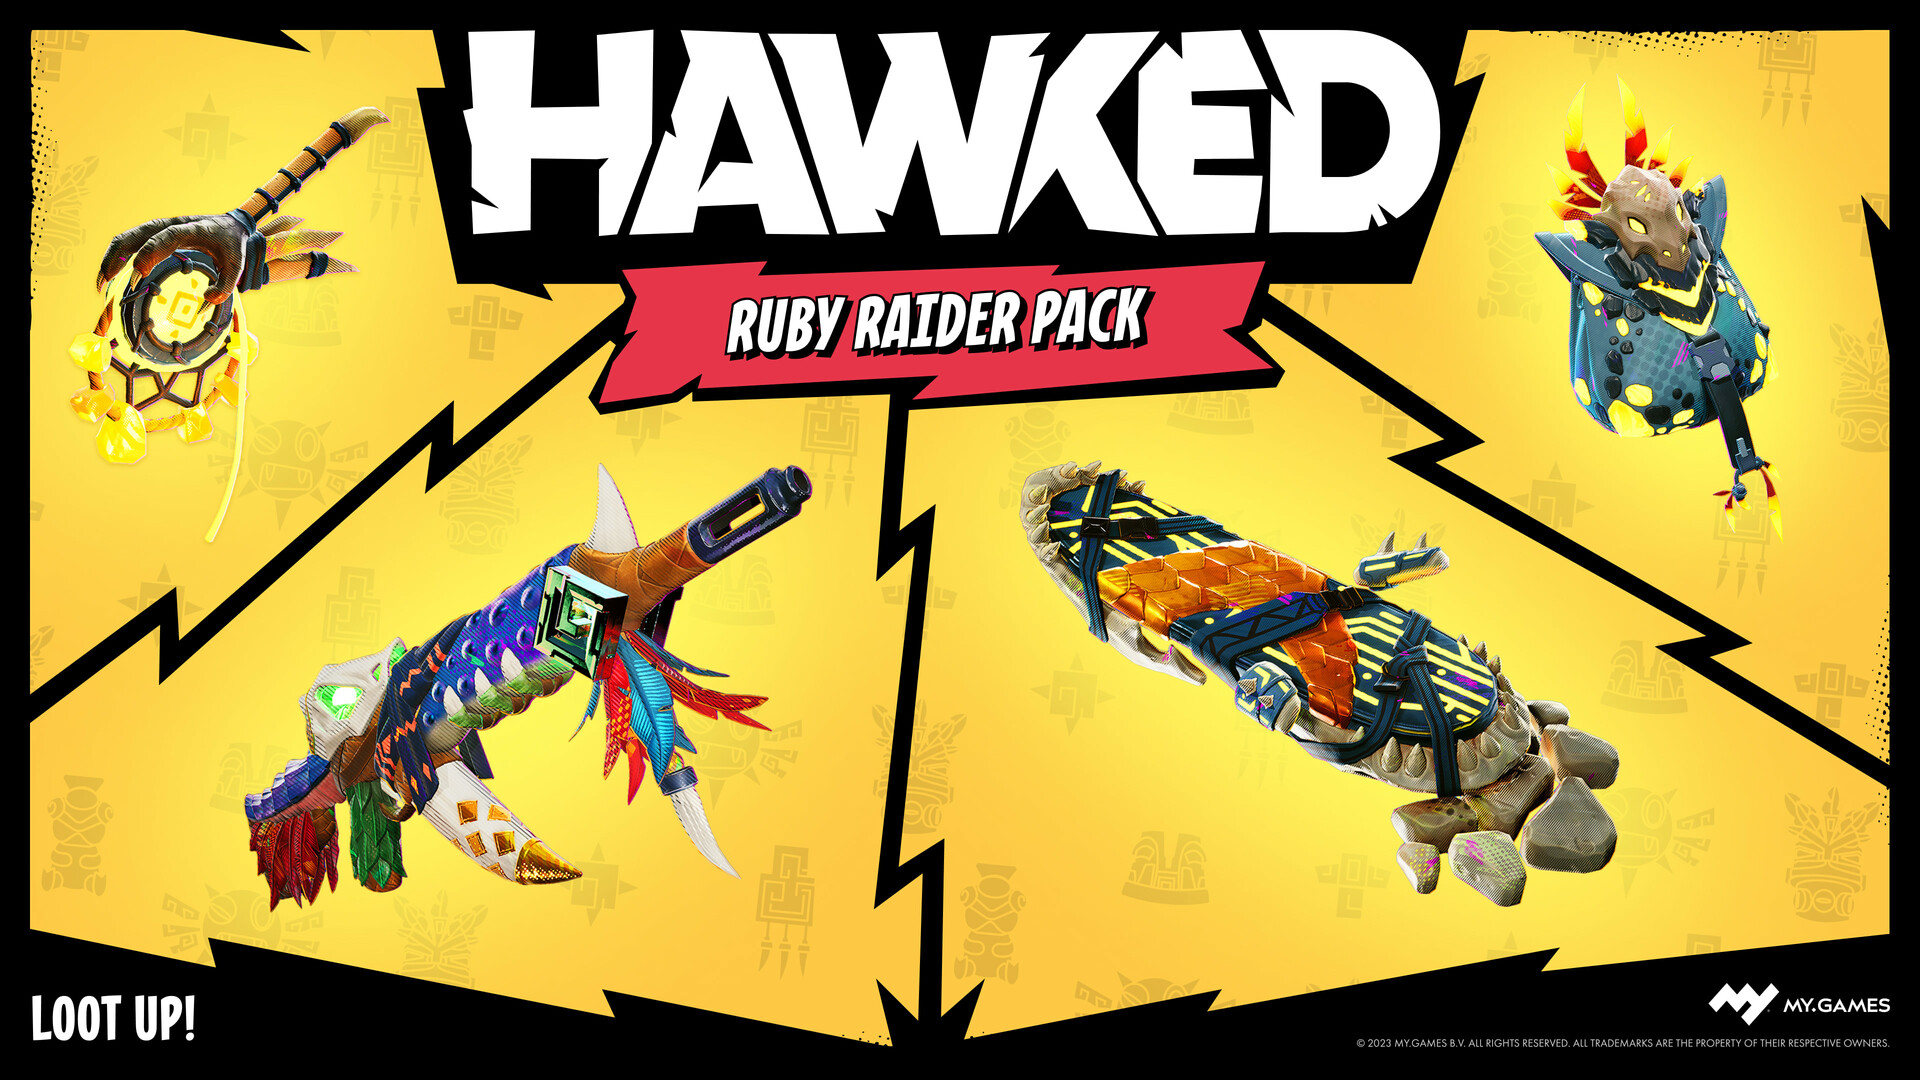 HAWKED — Ruby Raider Pack Featured Screenshot #1